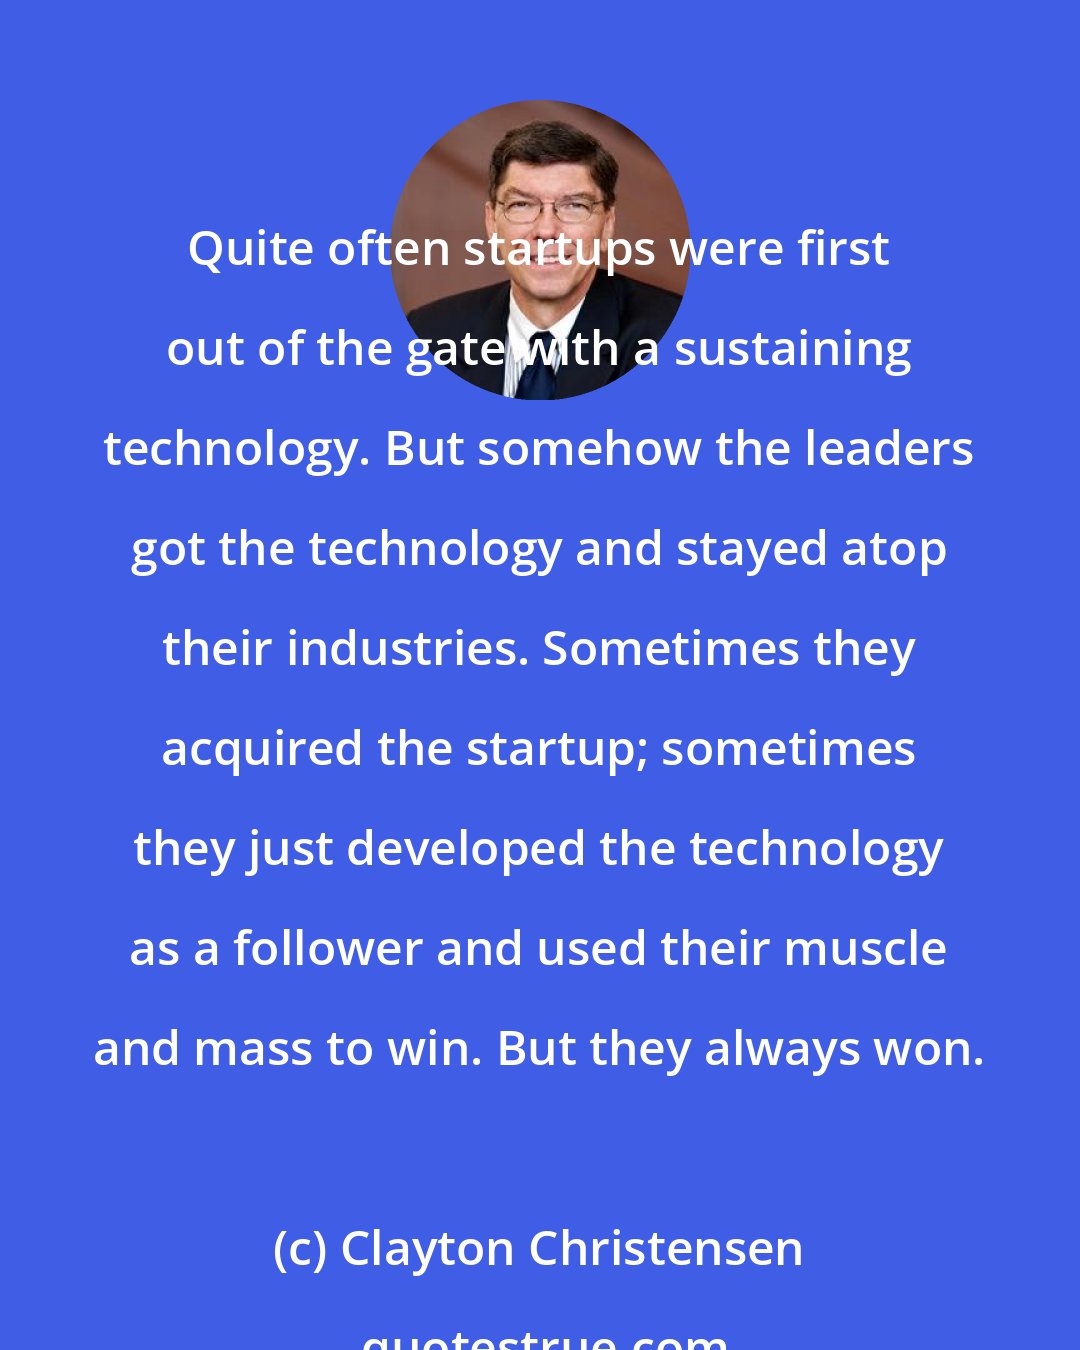 Clayton Christensen: Quite often startups were first out of the gate with a sustaining technology. But somehow the leaders got the technology and stayed atop their industries. Sometimes they acquired the startup; sometimes they just developed the technology as a follower and used their muscle and mass to win. But they always won.